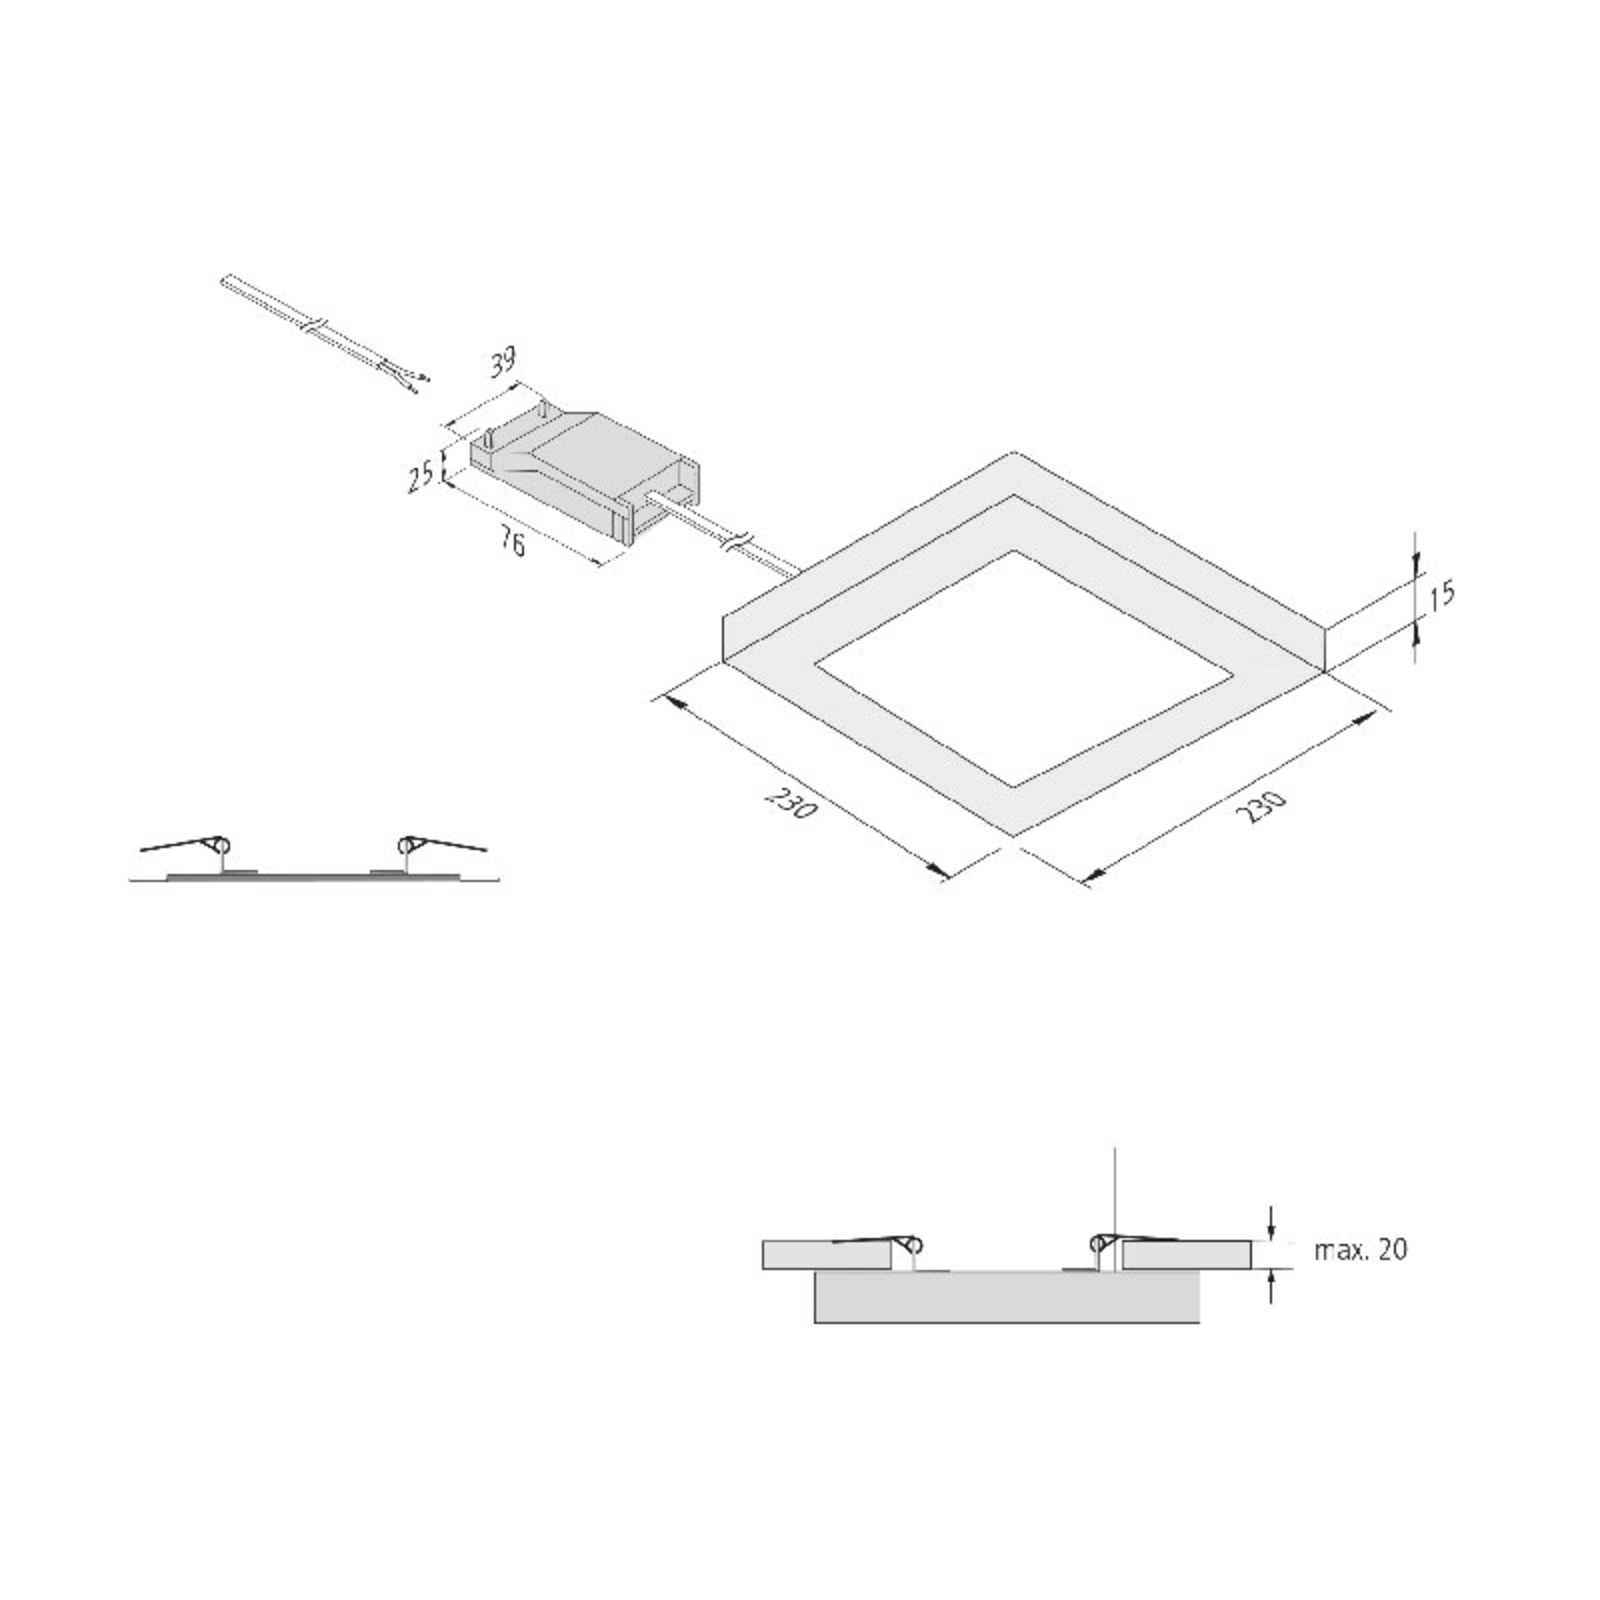 FQ 65/205 LED light, surface/recessed, 3,000 K